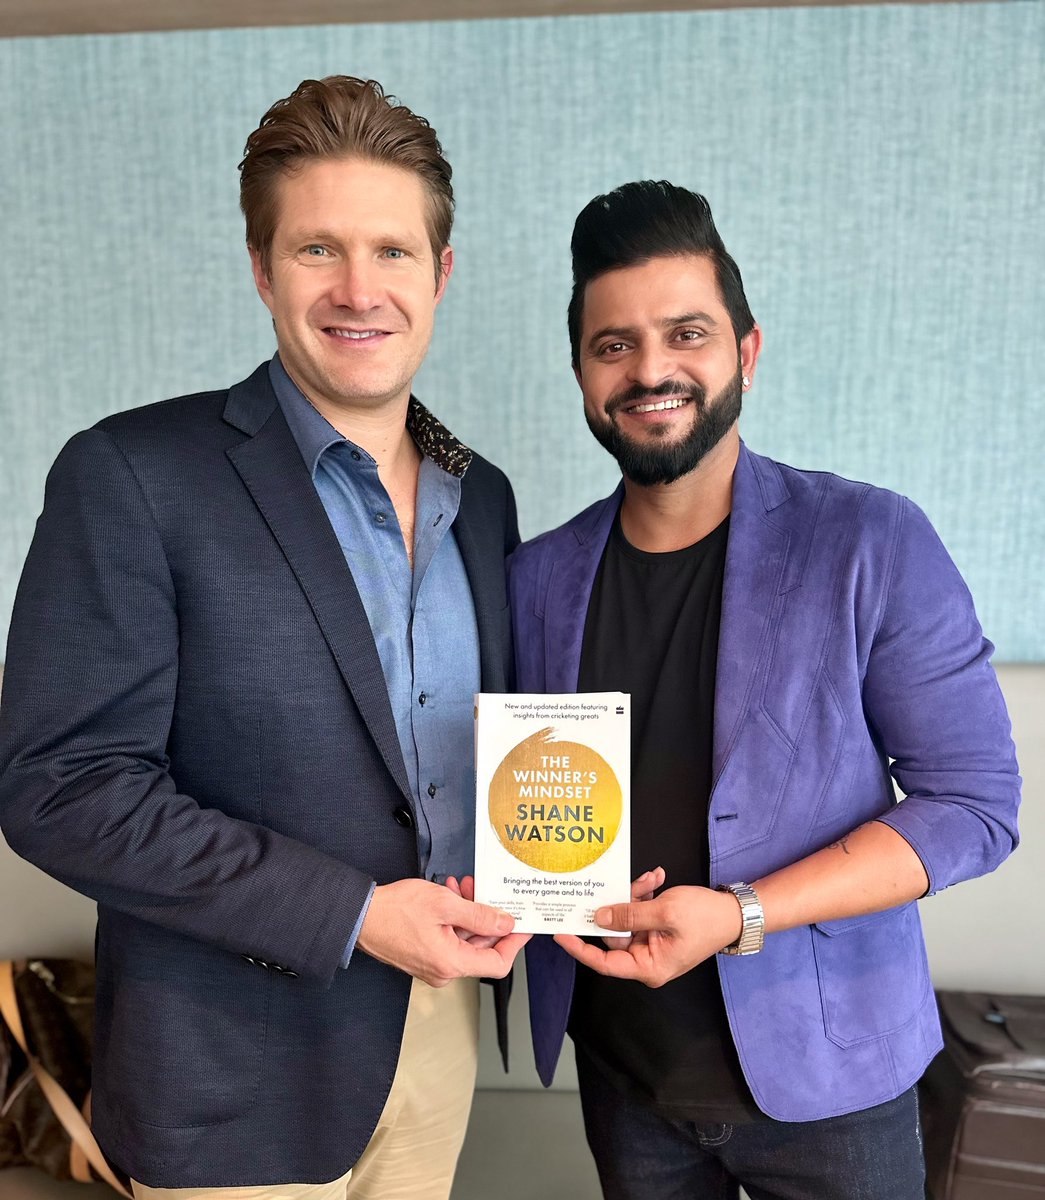 Congratulations to @ShaneRWatson33 on the release of ‘The Winner’s Mindset’! 📚 This self help book is all about bringing out the best version of yourself, both on the field and in life. Here’s to unlocking that winning mindset in every game and every moment! 🏏💪